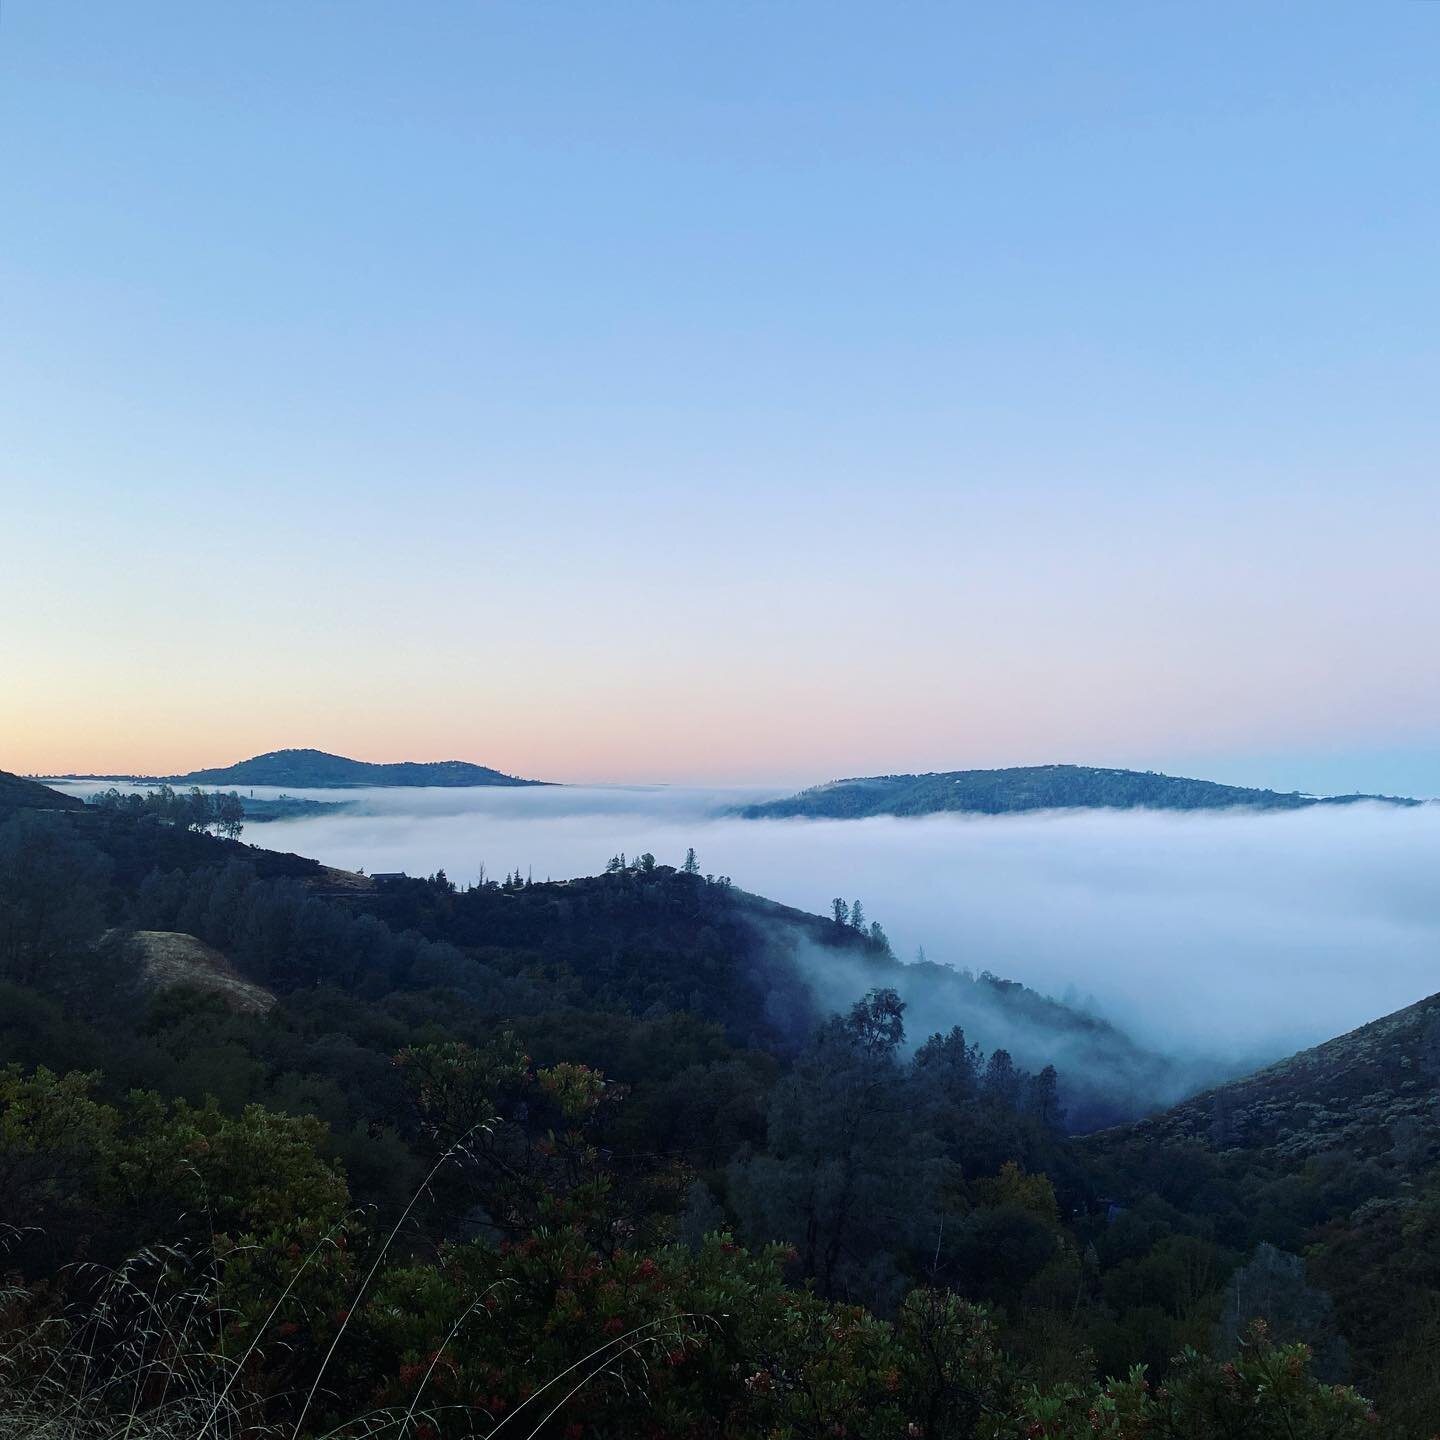 A pretty spectacular view this morning overlooking a blanket of fog above the American River. Driving so much every day is pretty taxing, but moments like these make it feel pretty special.